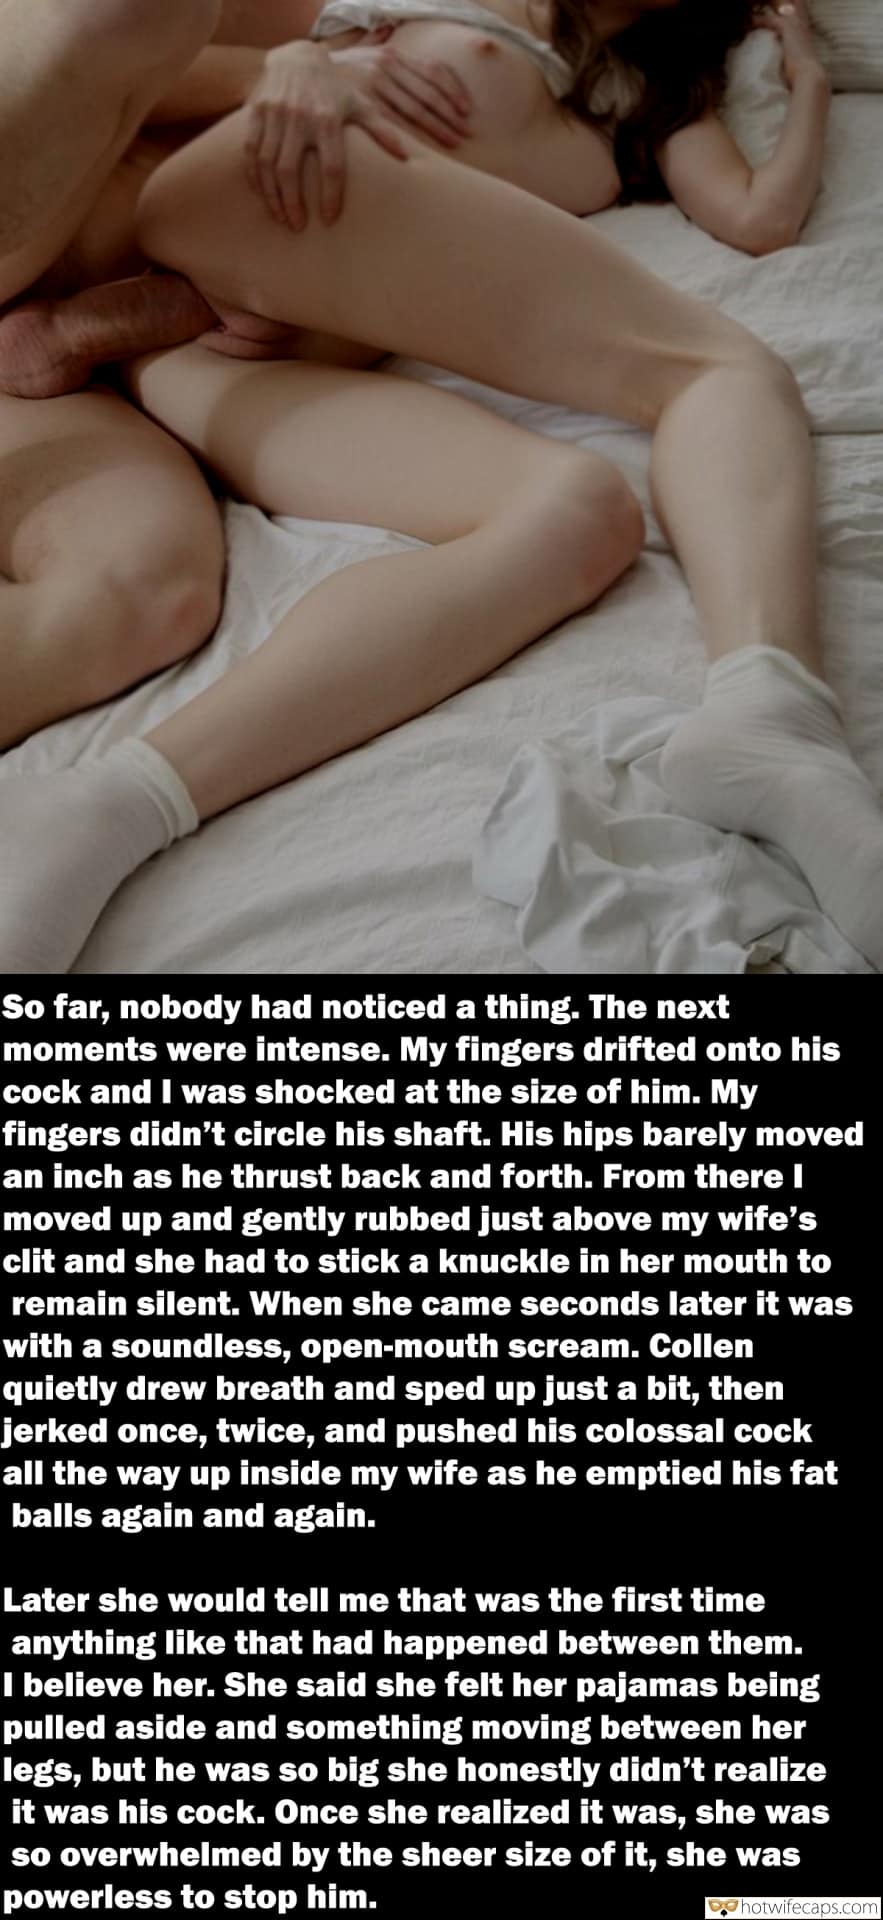 It's too big Bigger Cock hotwife caption: So far, nobody had noticed a thing. The next moments were intense. My fingers drifted onto his cock and I was shocked at the size of him. My fingers didn’t circle his shaft. His hips barely moved an inch as...